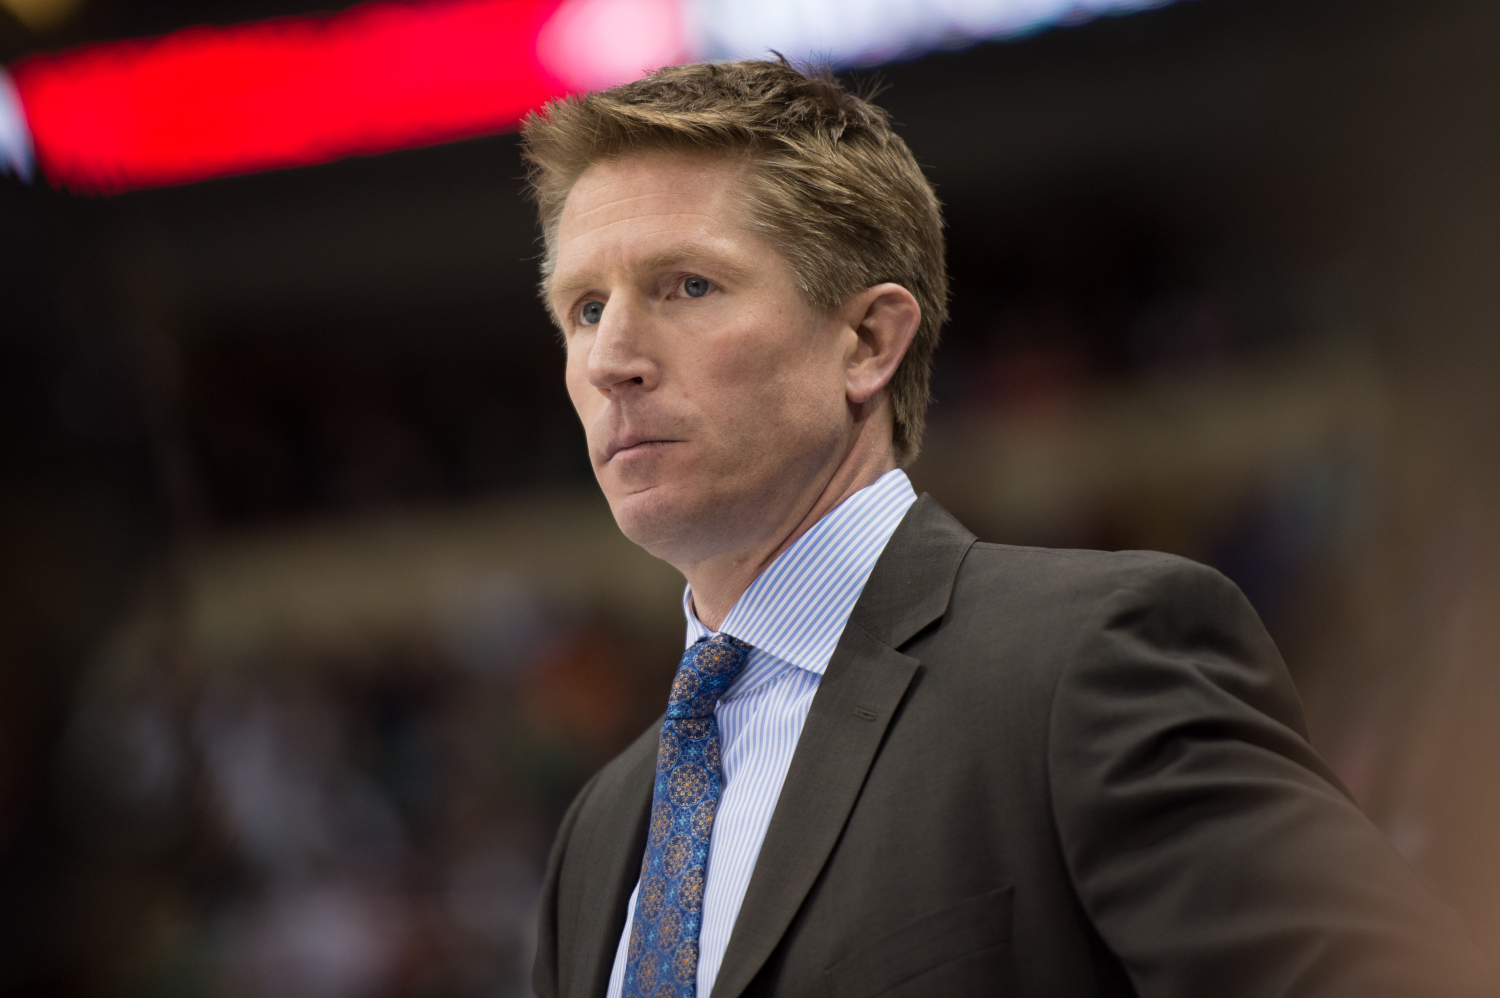 Giving it the old college try: Dave Hakstol